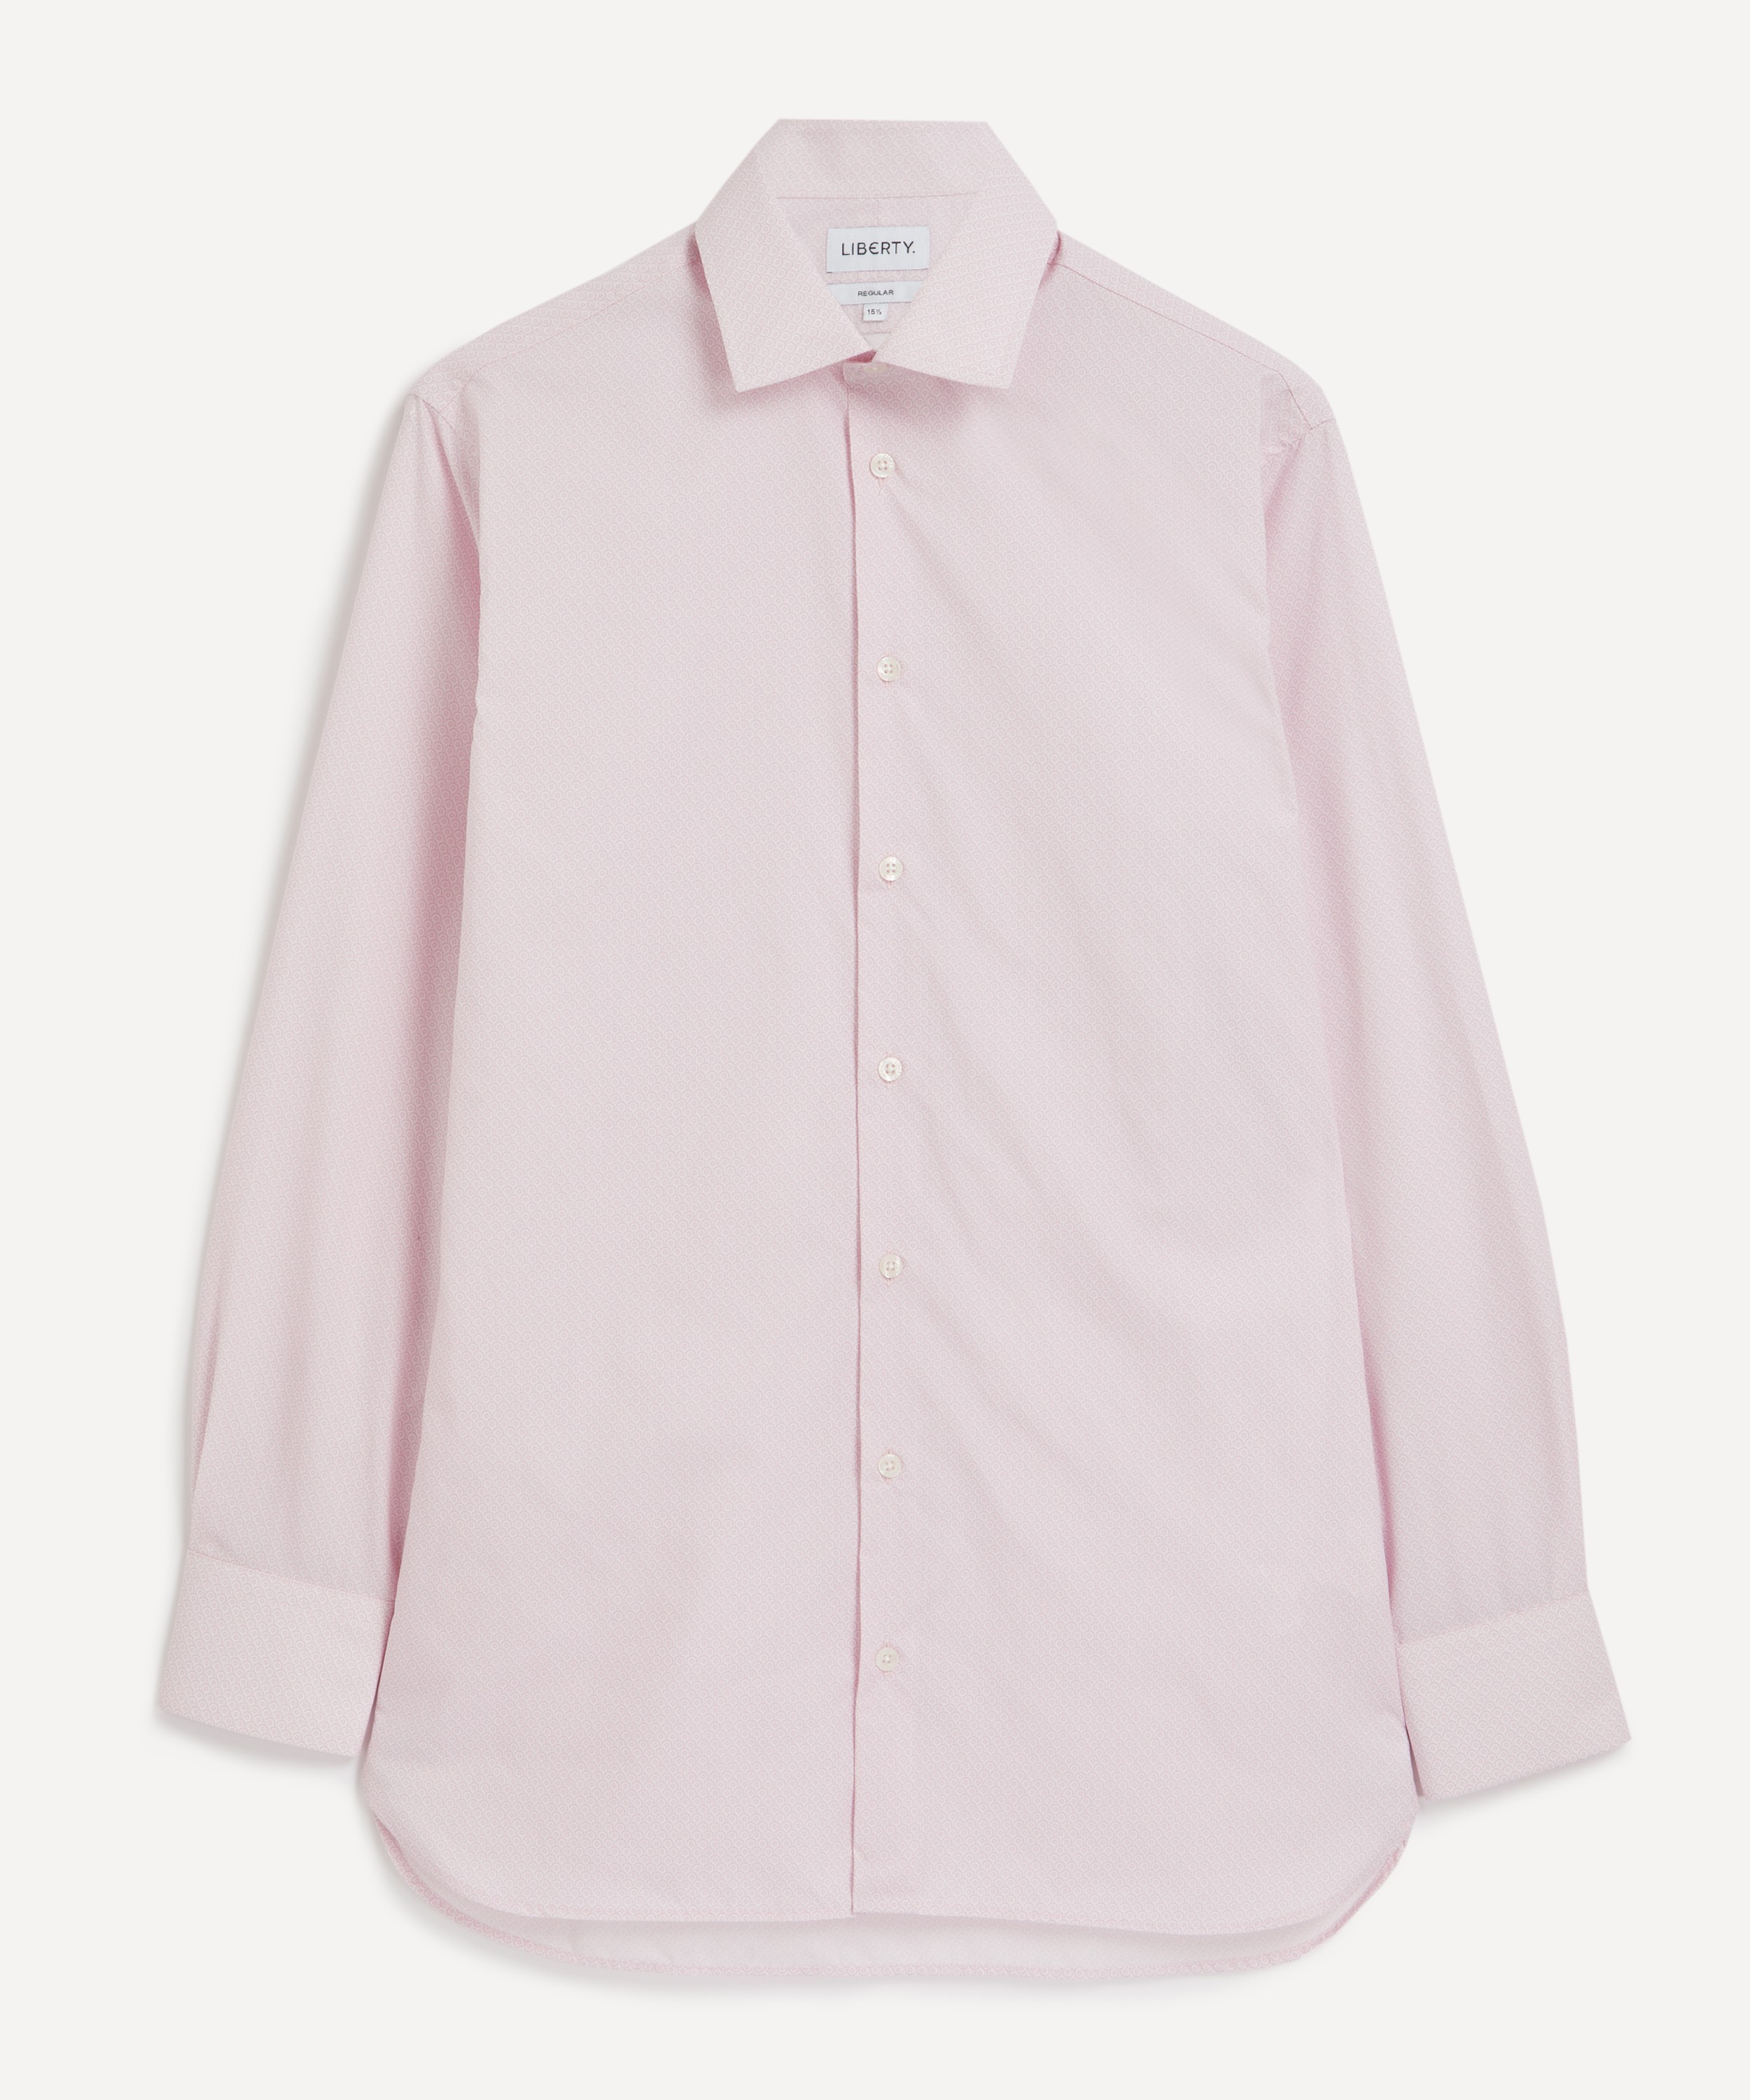 Liberty - New British Tailored Fit Formal Cotton Poplin Shirt in Solstice